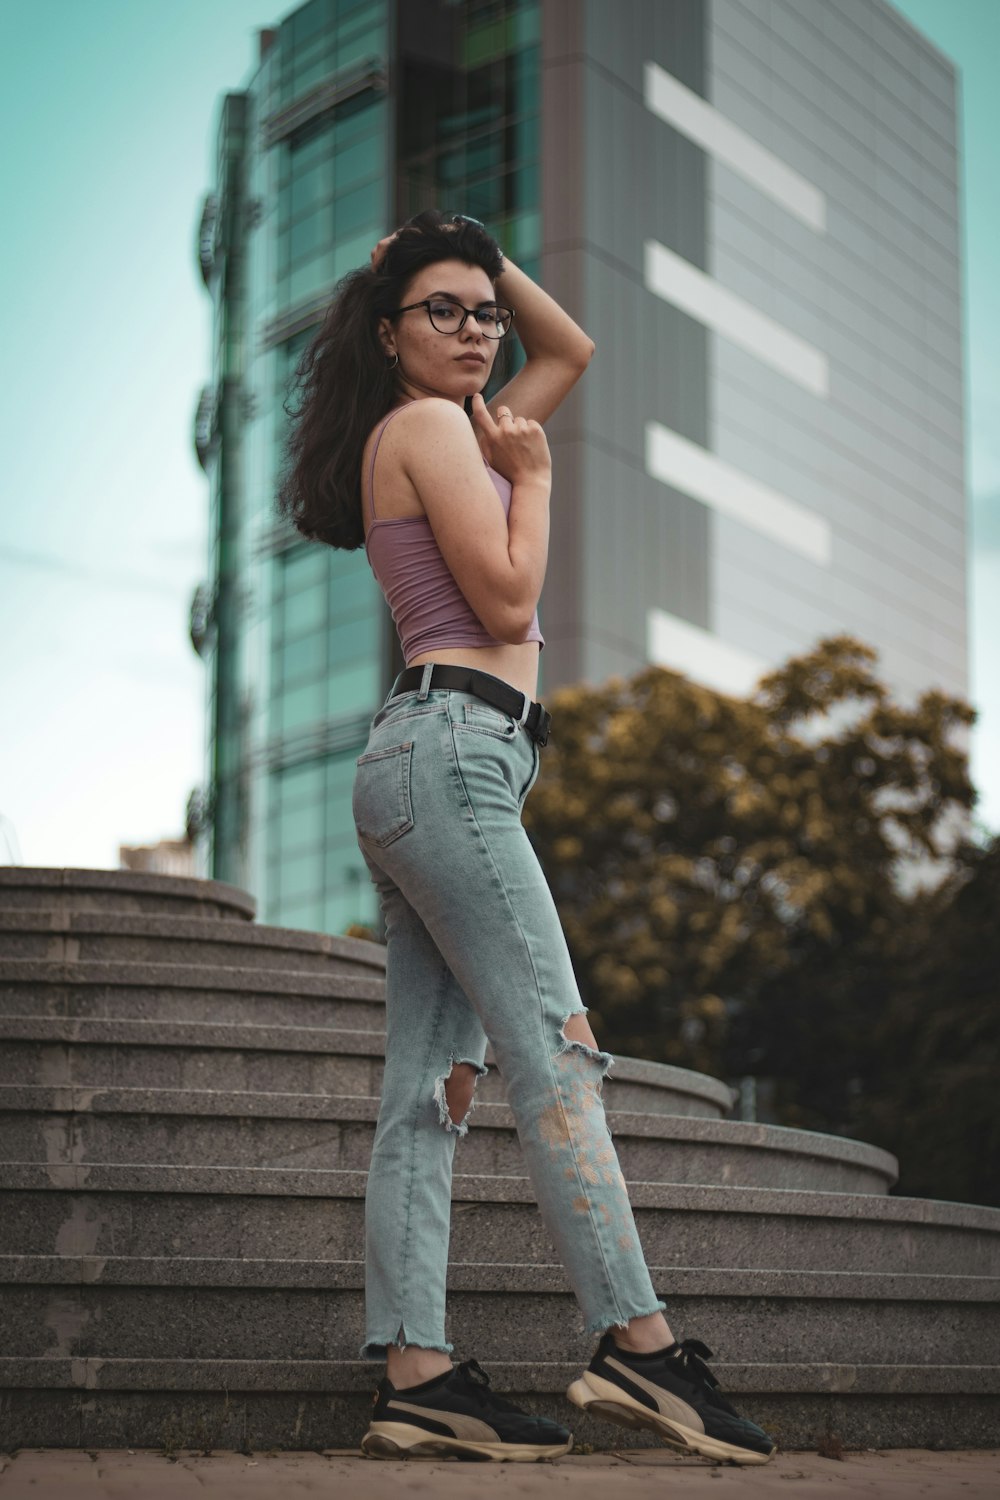 Woman in black sports bra and blue denim jeans standing on stairs during  daytime photo – Free Pants Image on Unsplash